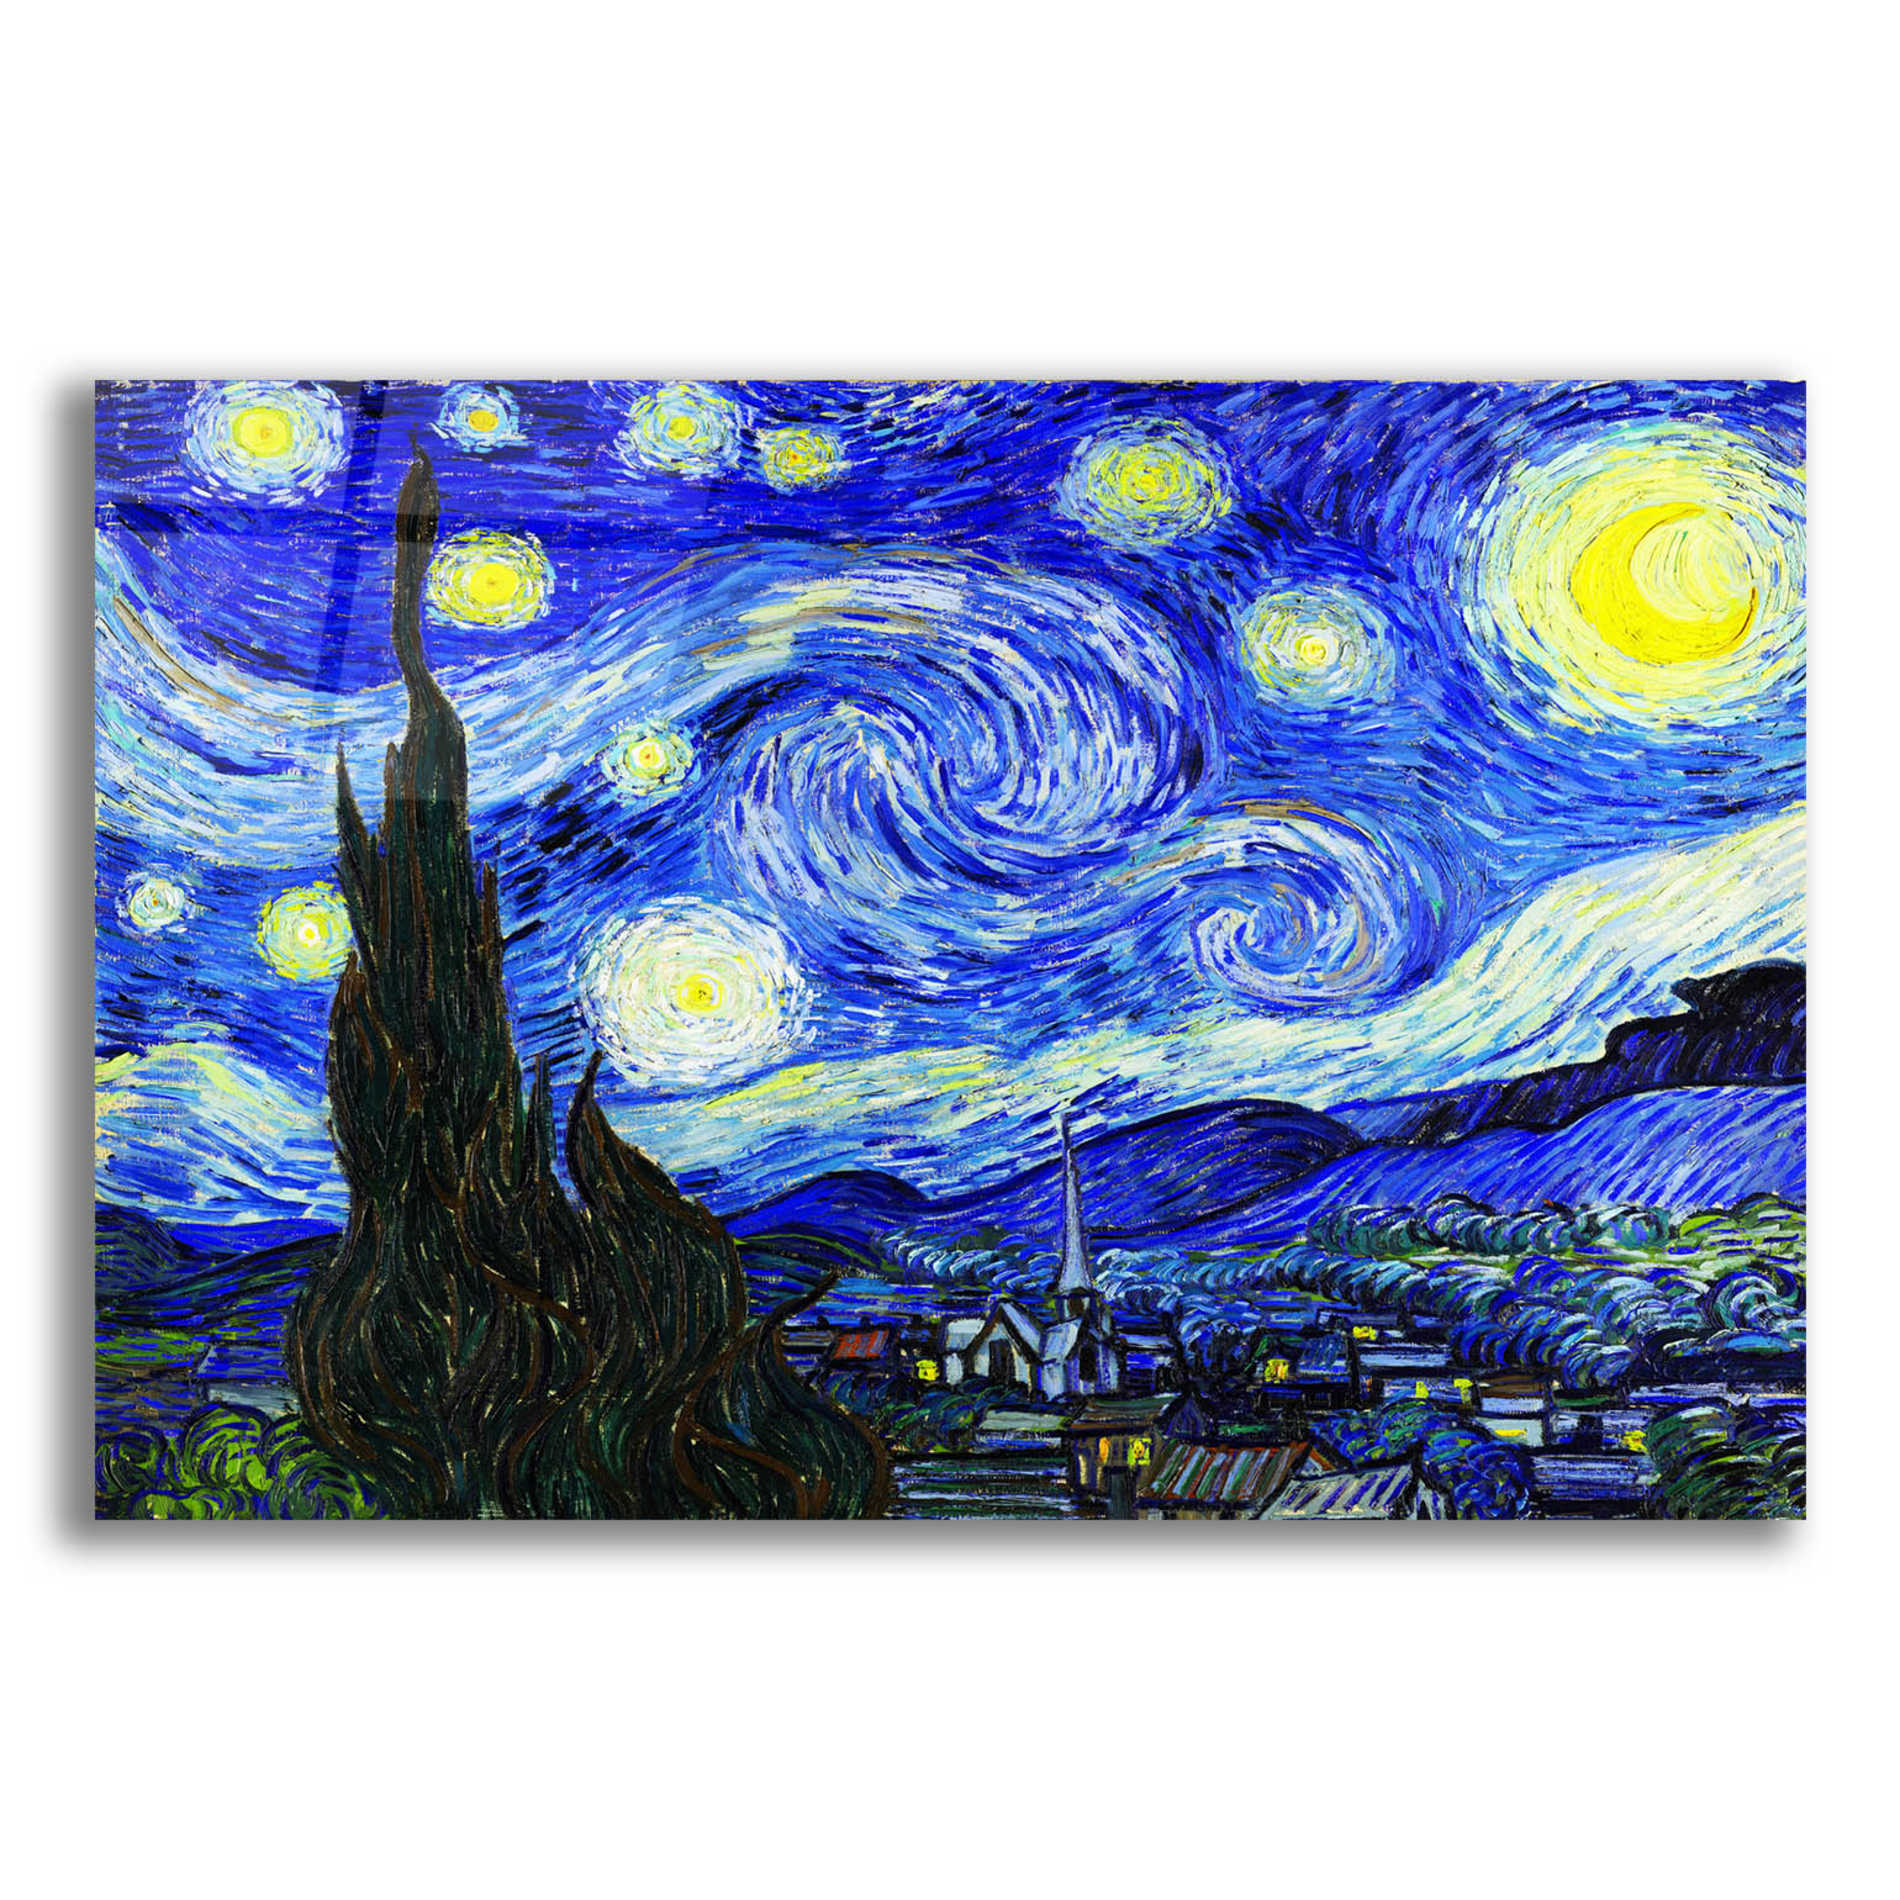 Epic Art 'The Starry Night' by Vincent van Gogh, Acrylic Glass Wall Art,16x12x1.1x0,24x20x1.1x0,30x26x1.74x0,54x40x1.74x0